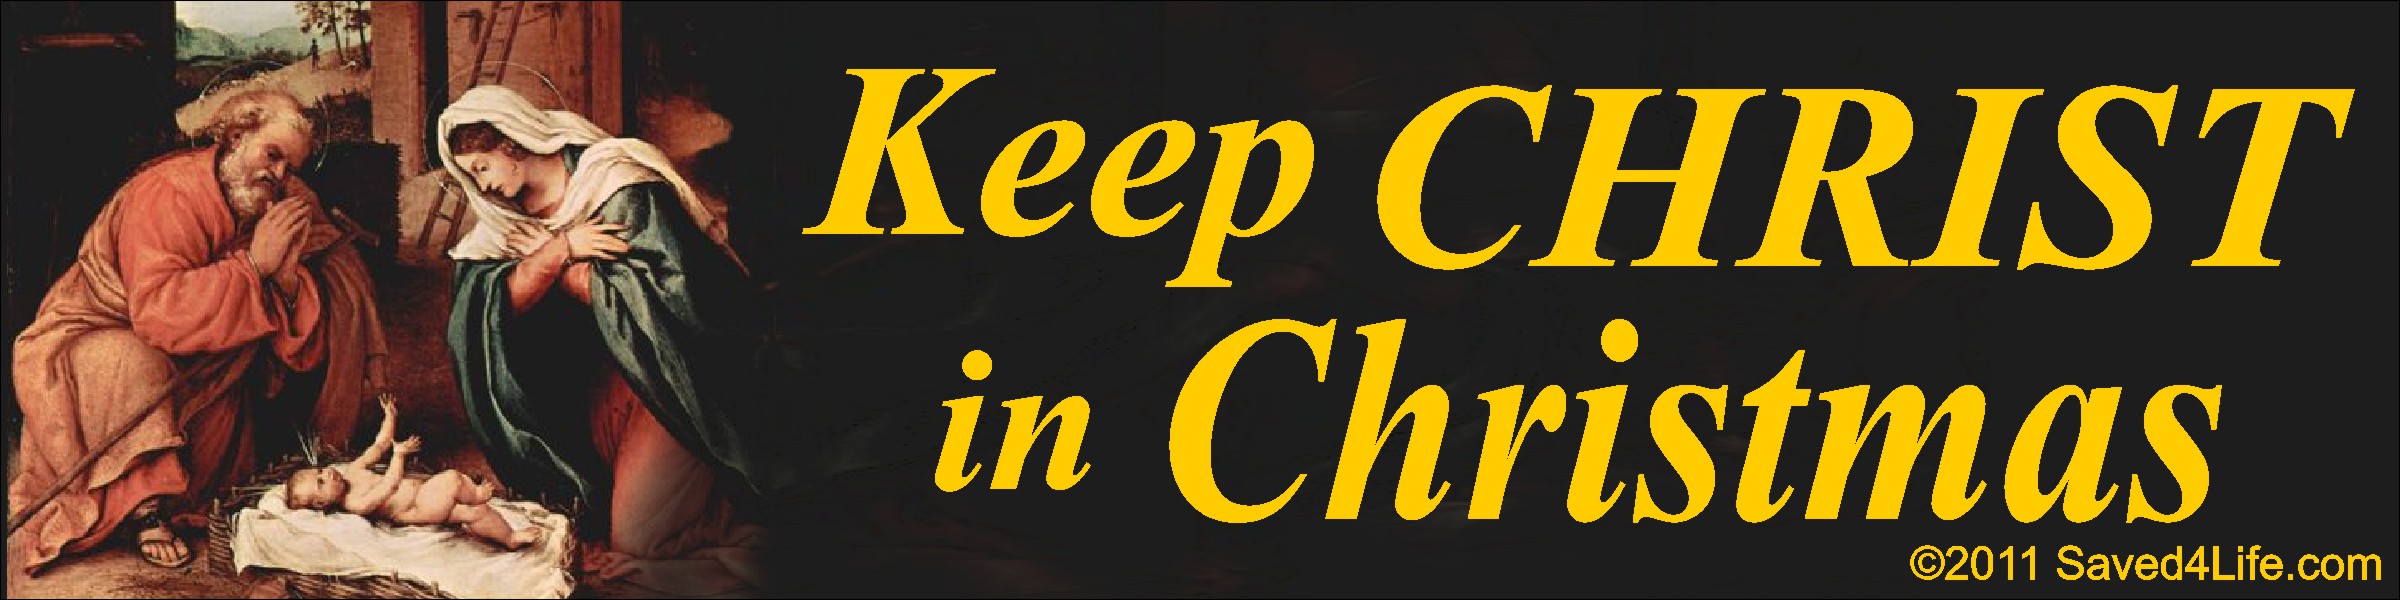 Keep Christ In Christmas (Nativity) 3.5x12 Bumper Stickers